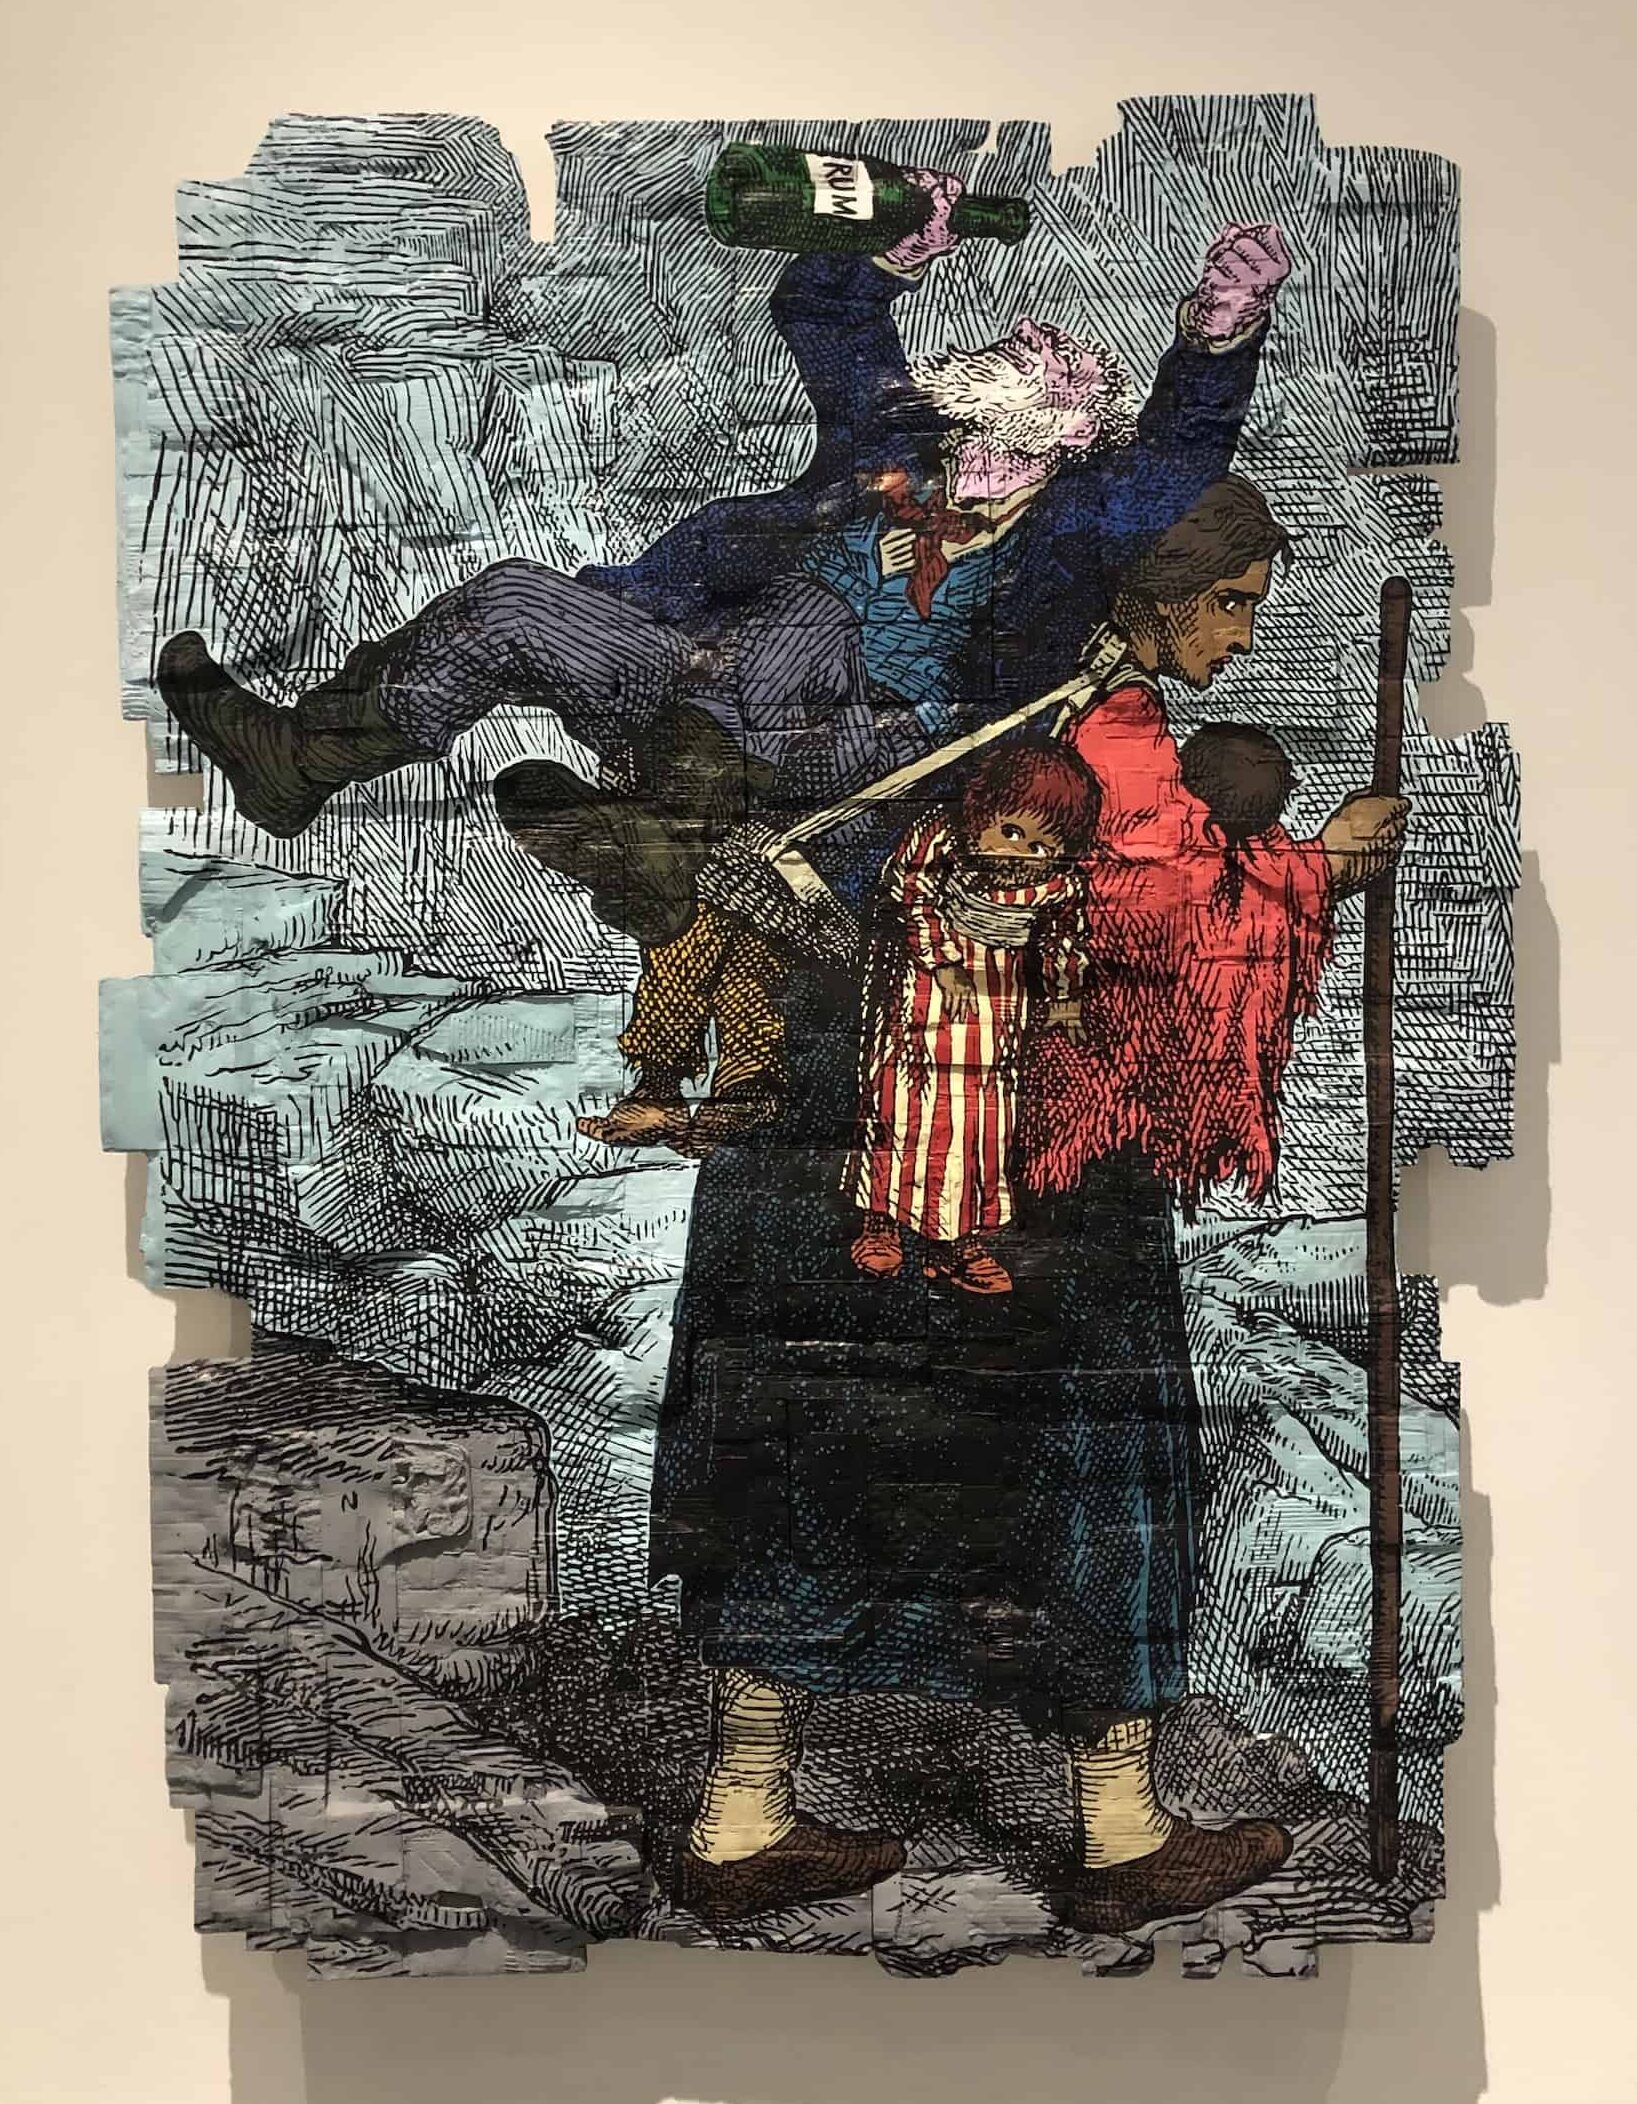 Cardboard work depicting the burden of wives in the Andrea Bowers exhibition